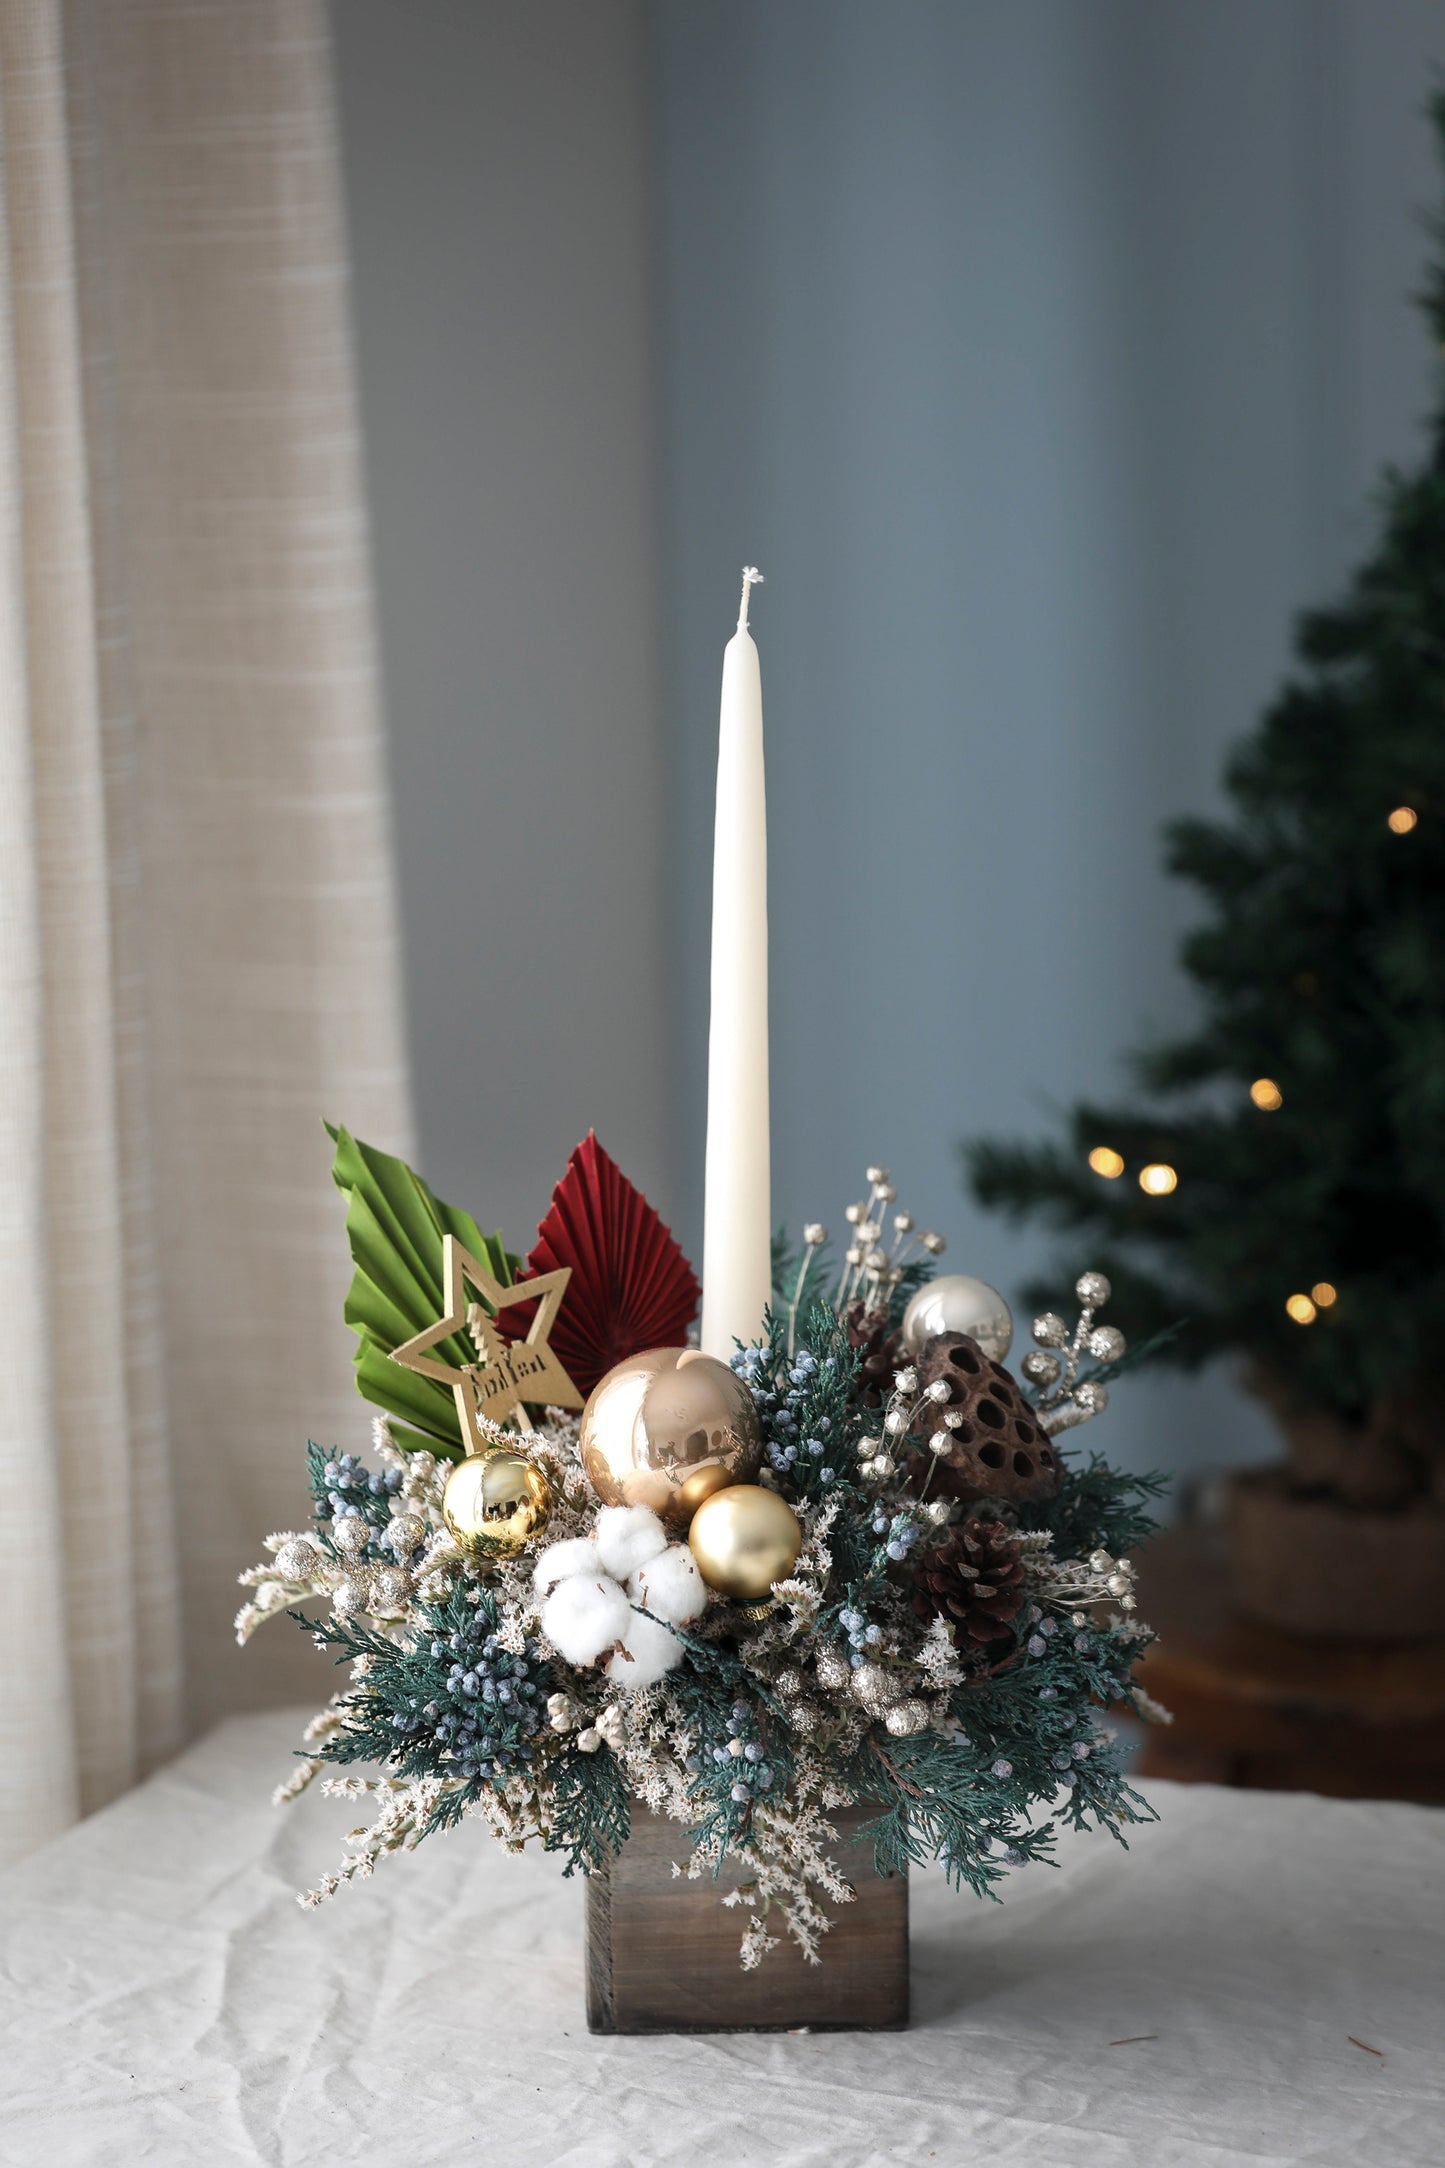 Christmas Star Candle Centerpiece